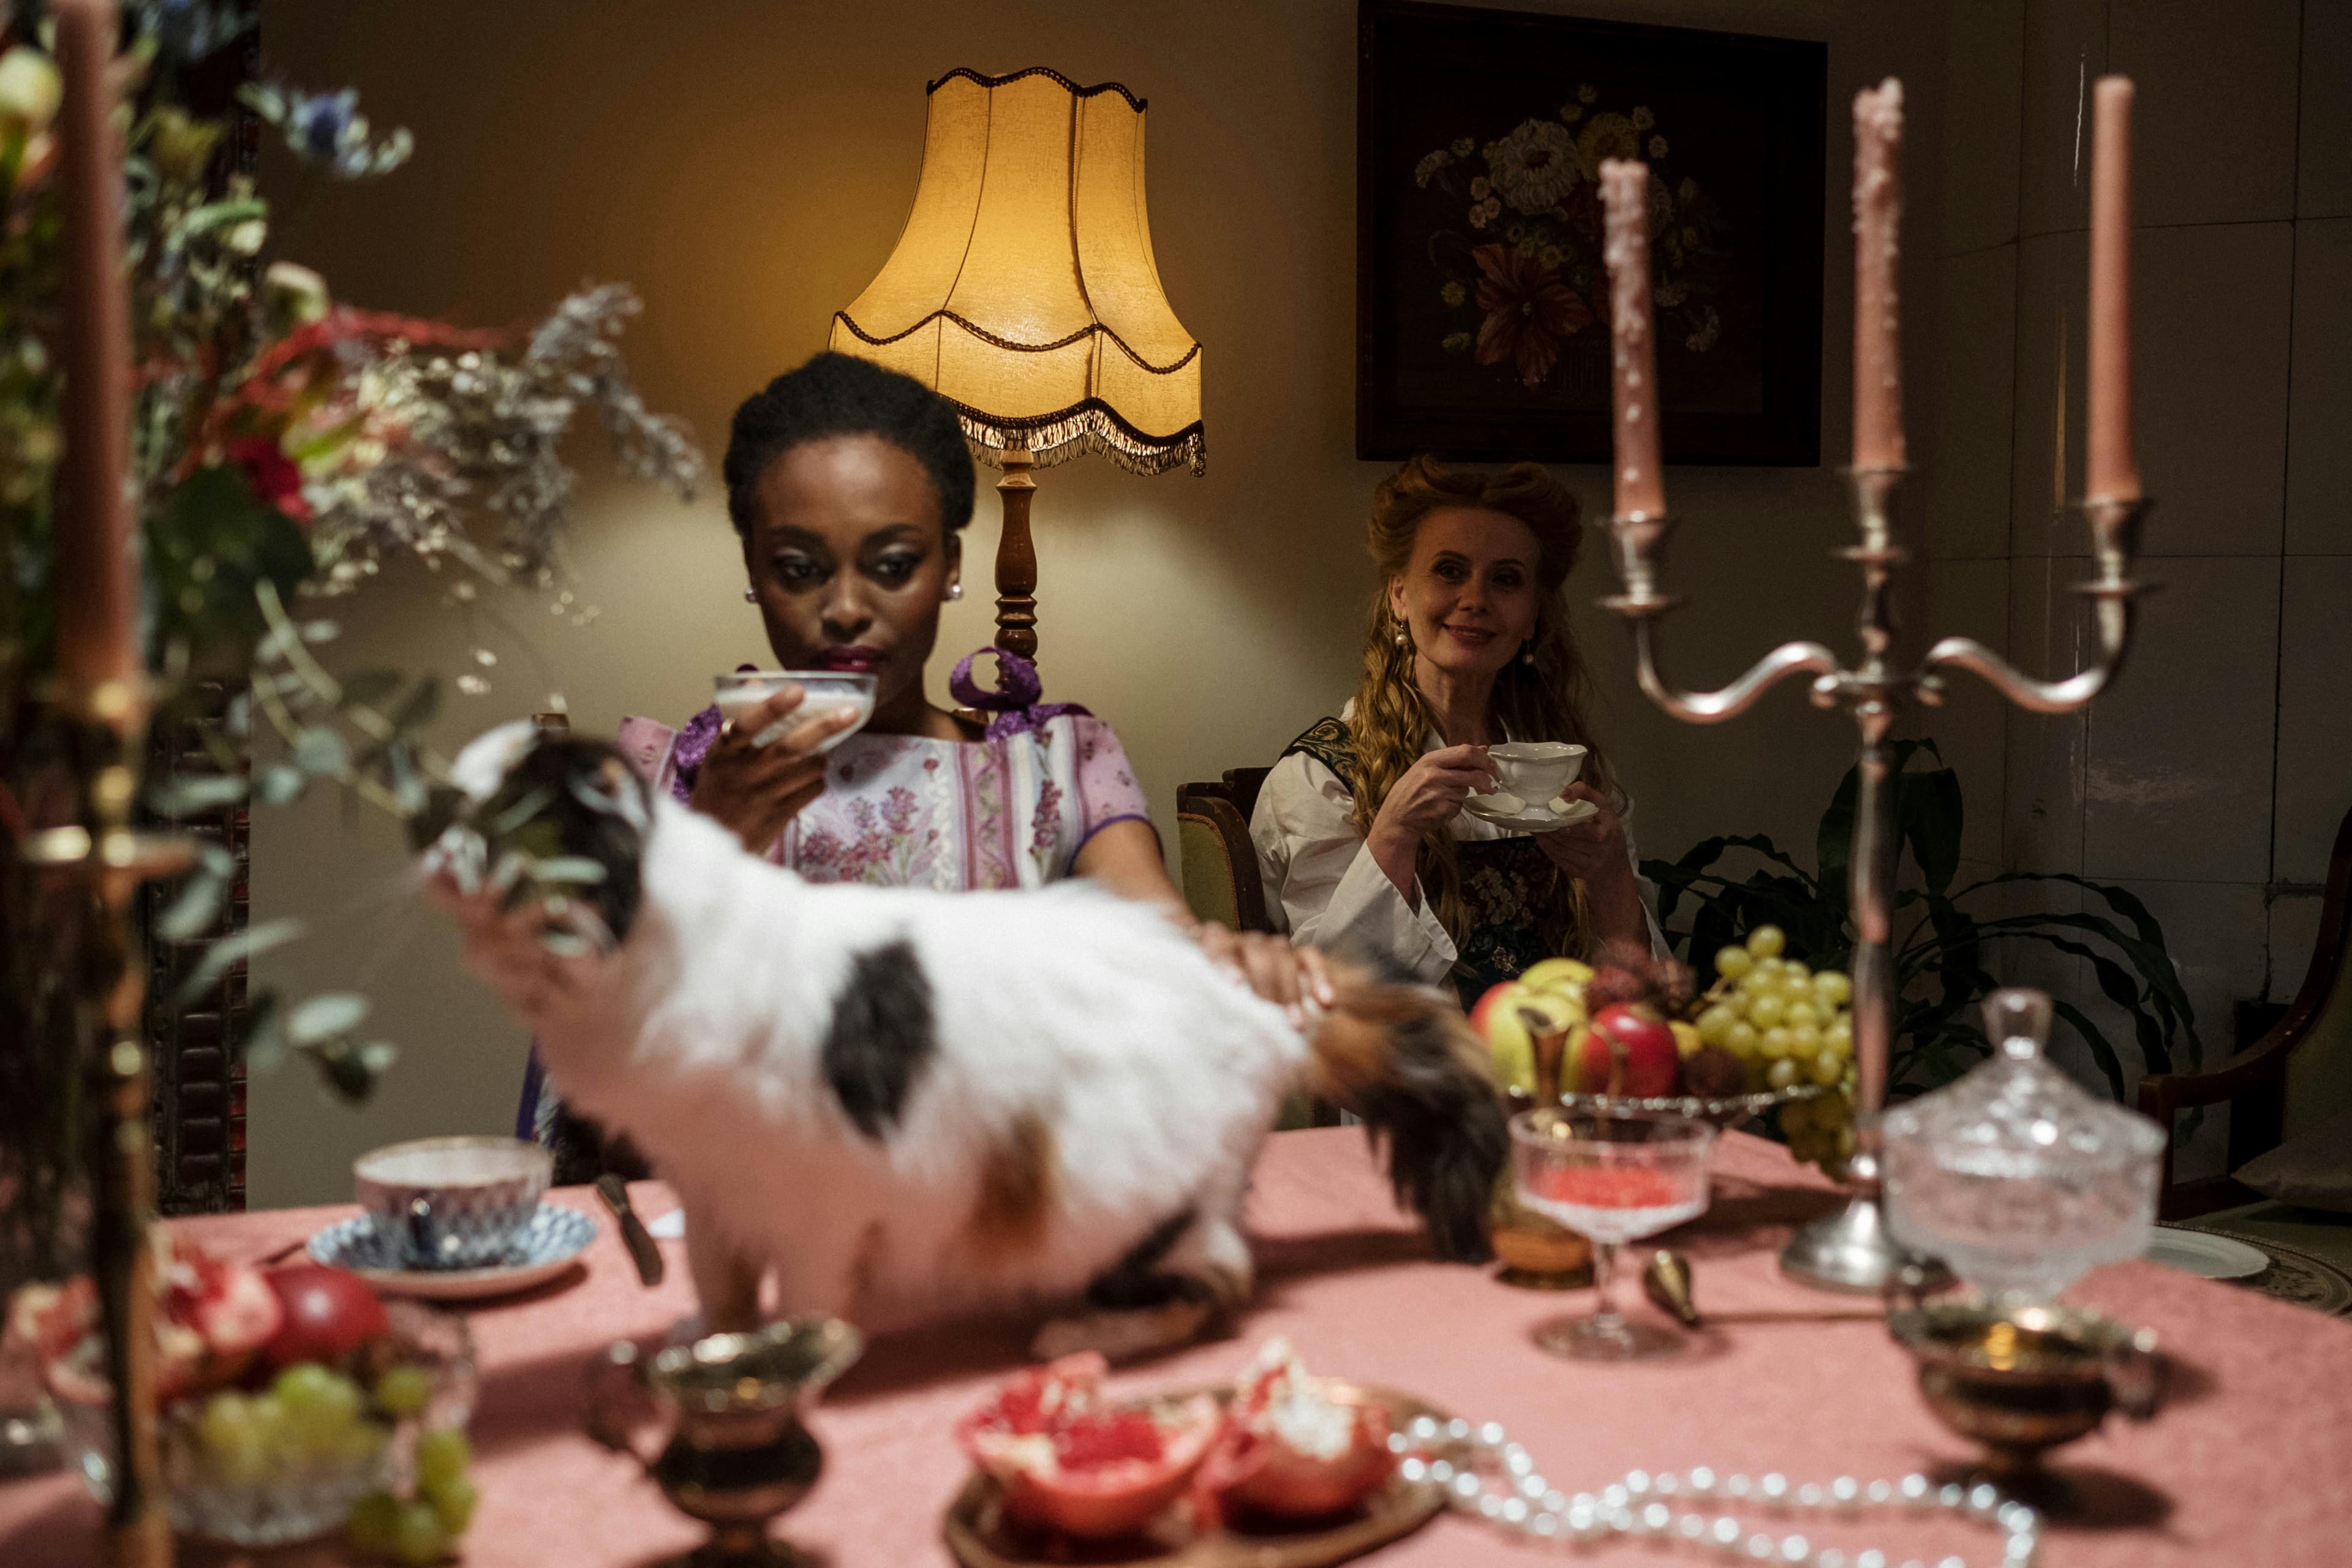 Hosting The Perfect Kitty Party With Your Girlies: Cocktail Edition